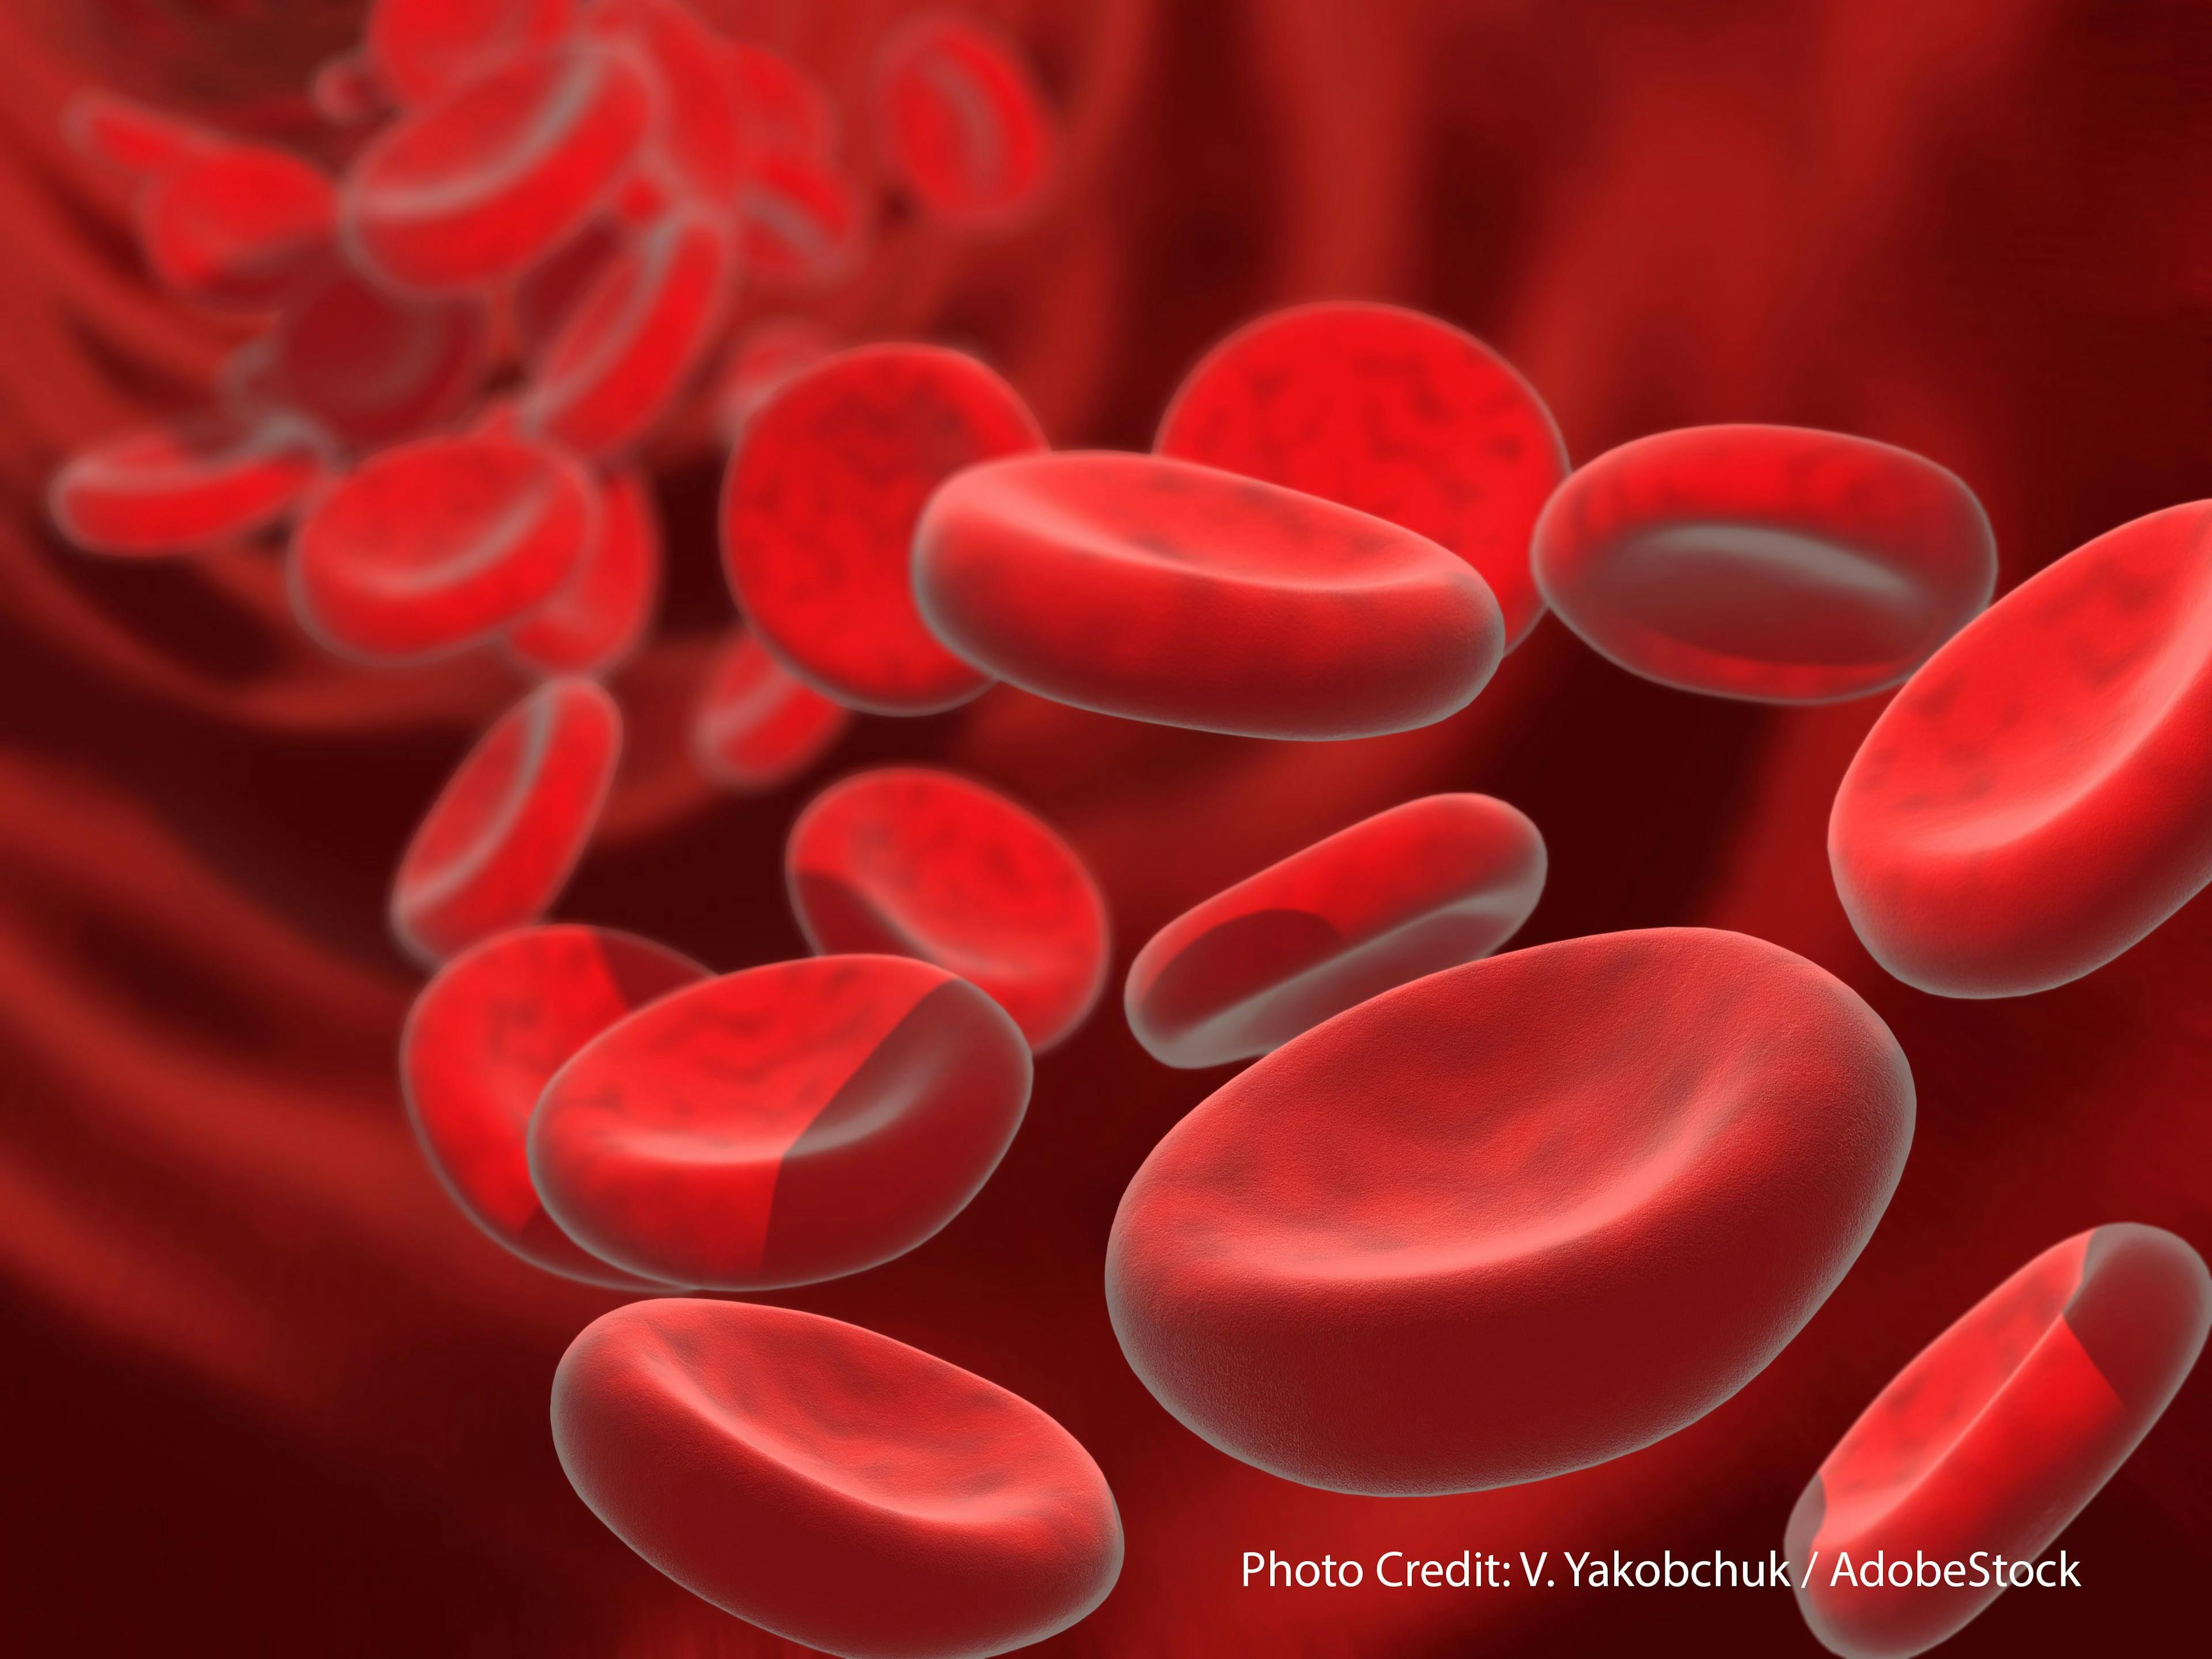 Supportive Care May Improve HSCT Experience in Geriatric Blood Cancers | Image Credit: © V. Yakobchuk - stock.adobe.com.